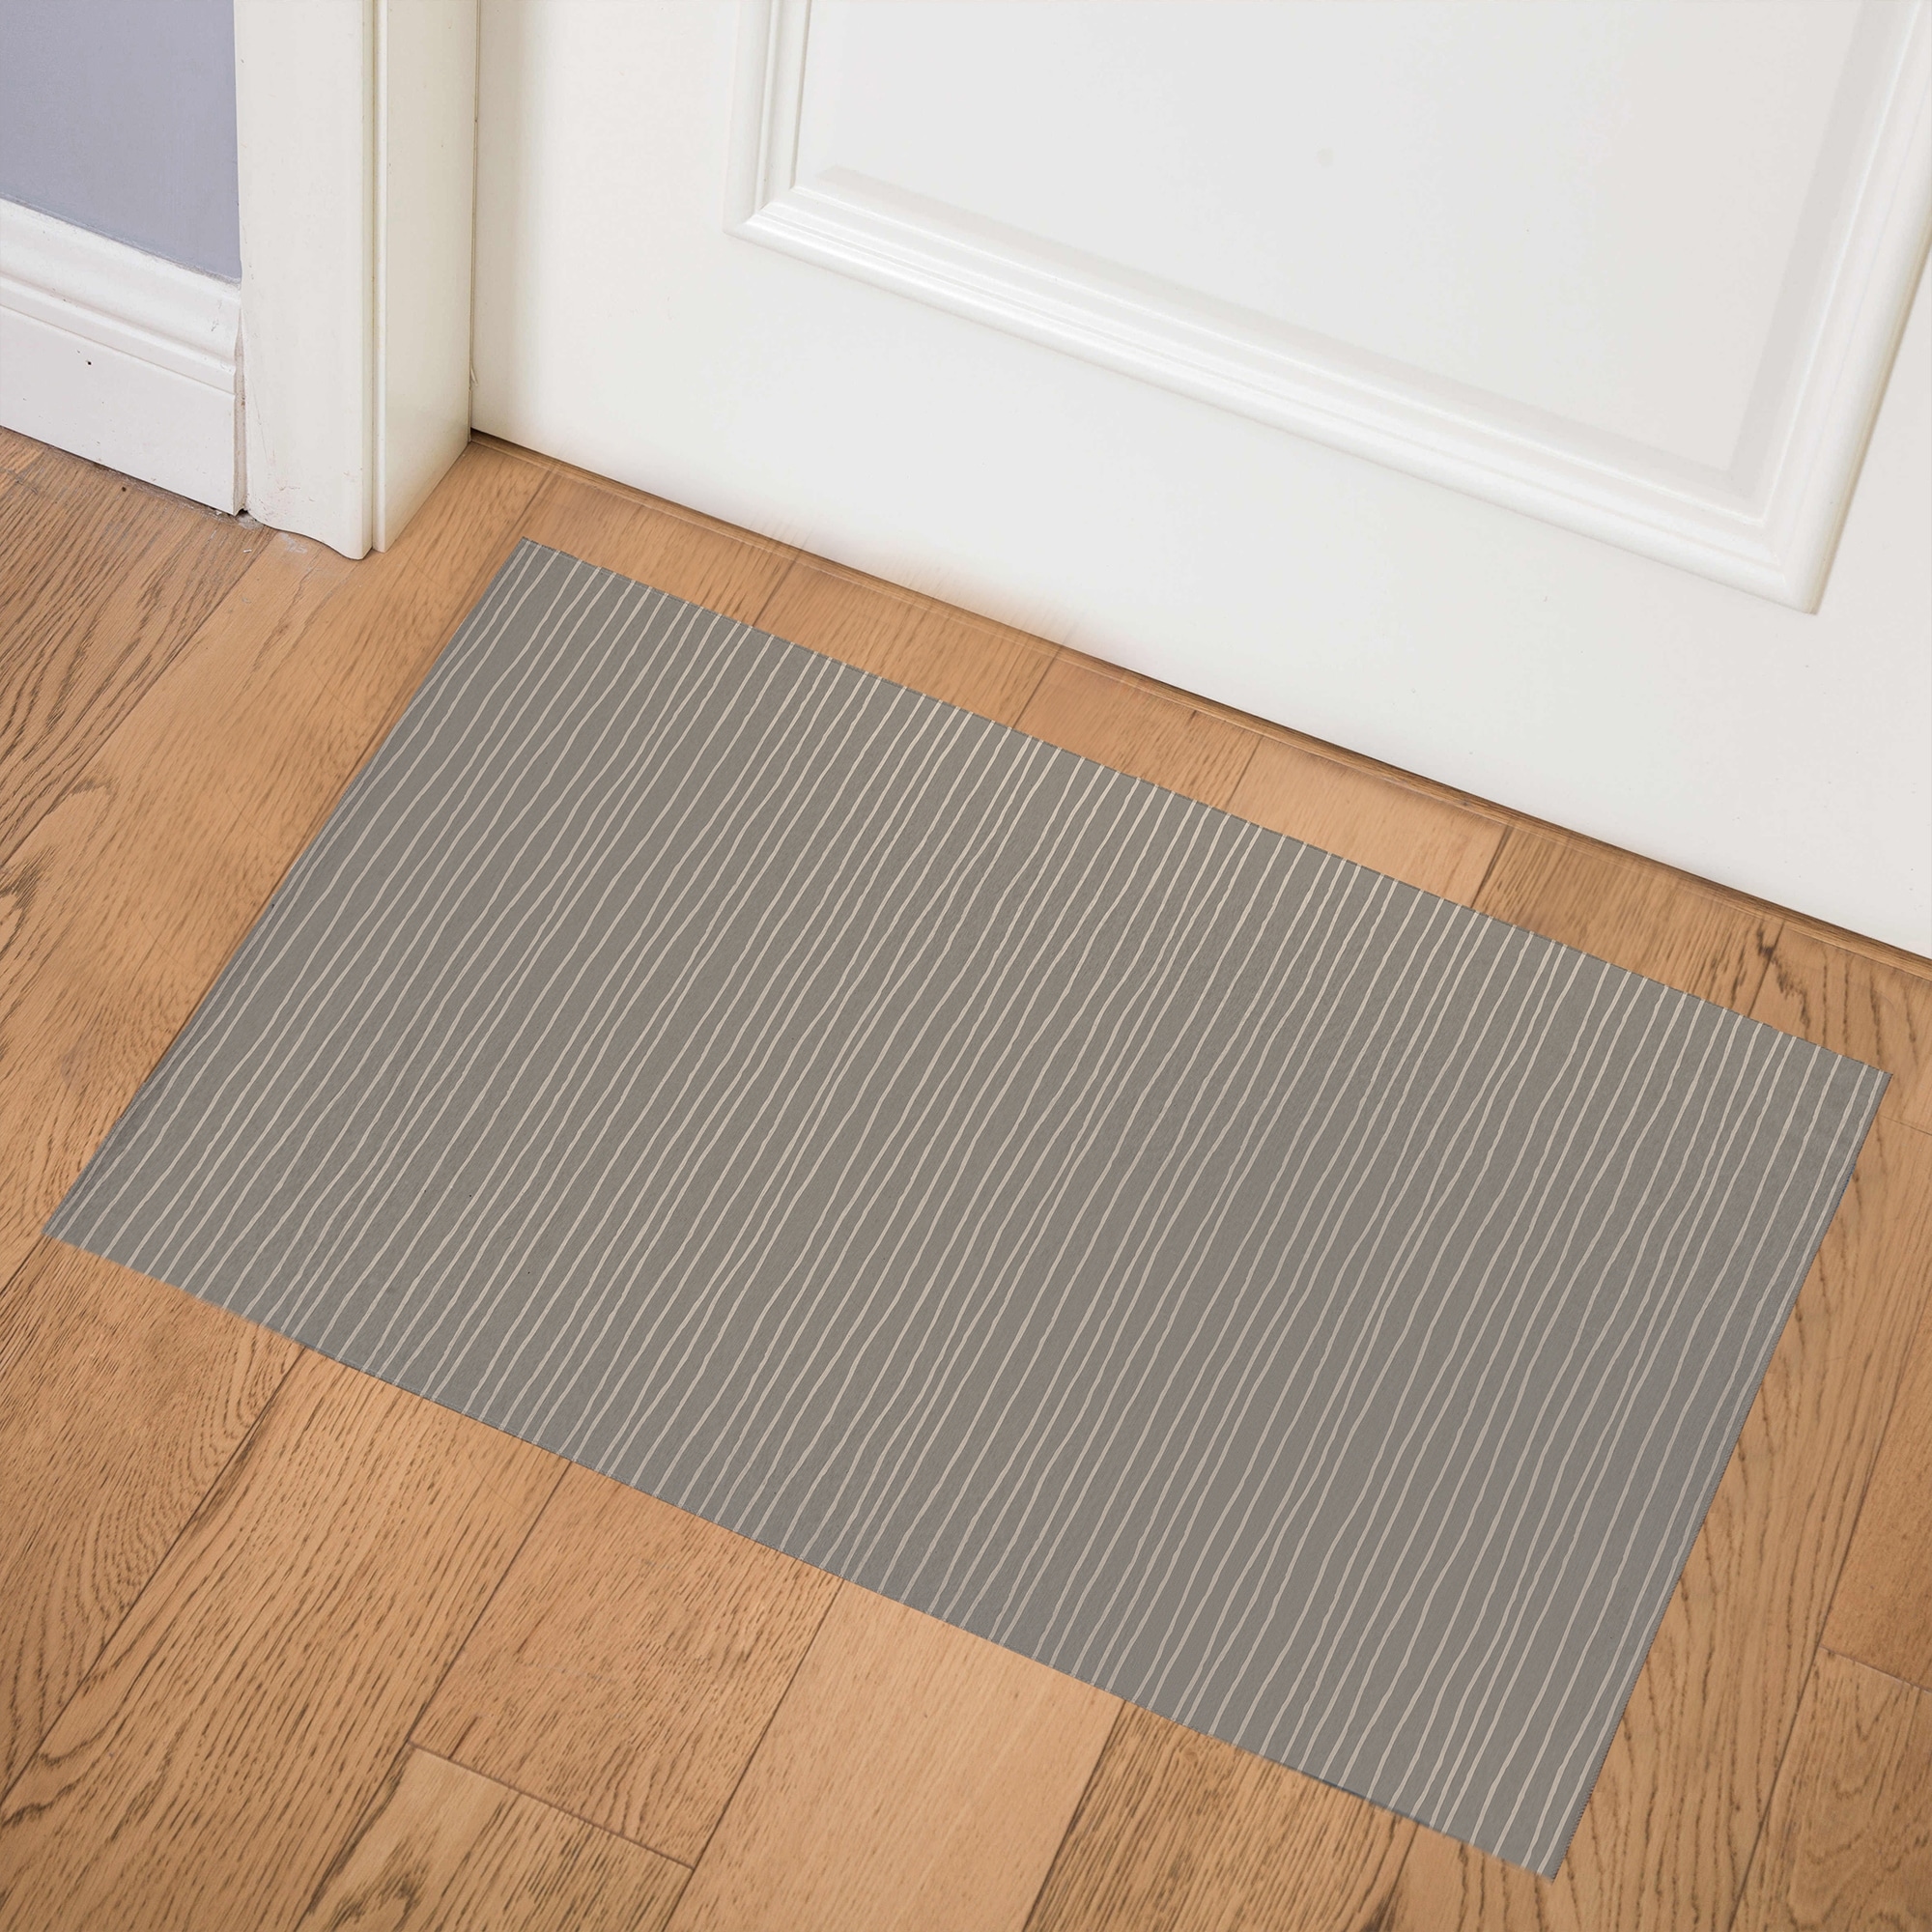 https://ak1.ostkcdn.com/images/products/is/images/direct/18695b0159e2782bb113ac5e375c18b079cbbccc/LINEAR-TAUPE-Indoor-Door-Mat-By-Kavka-Designs.jpg